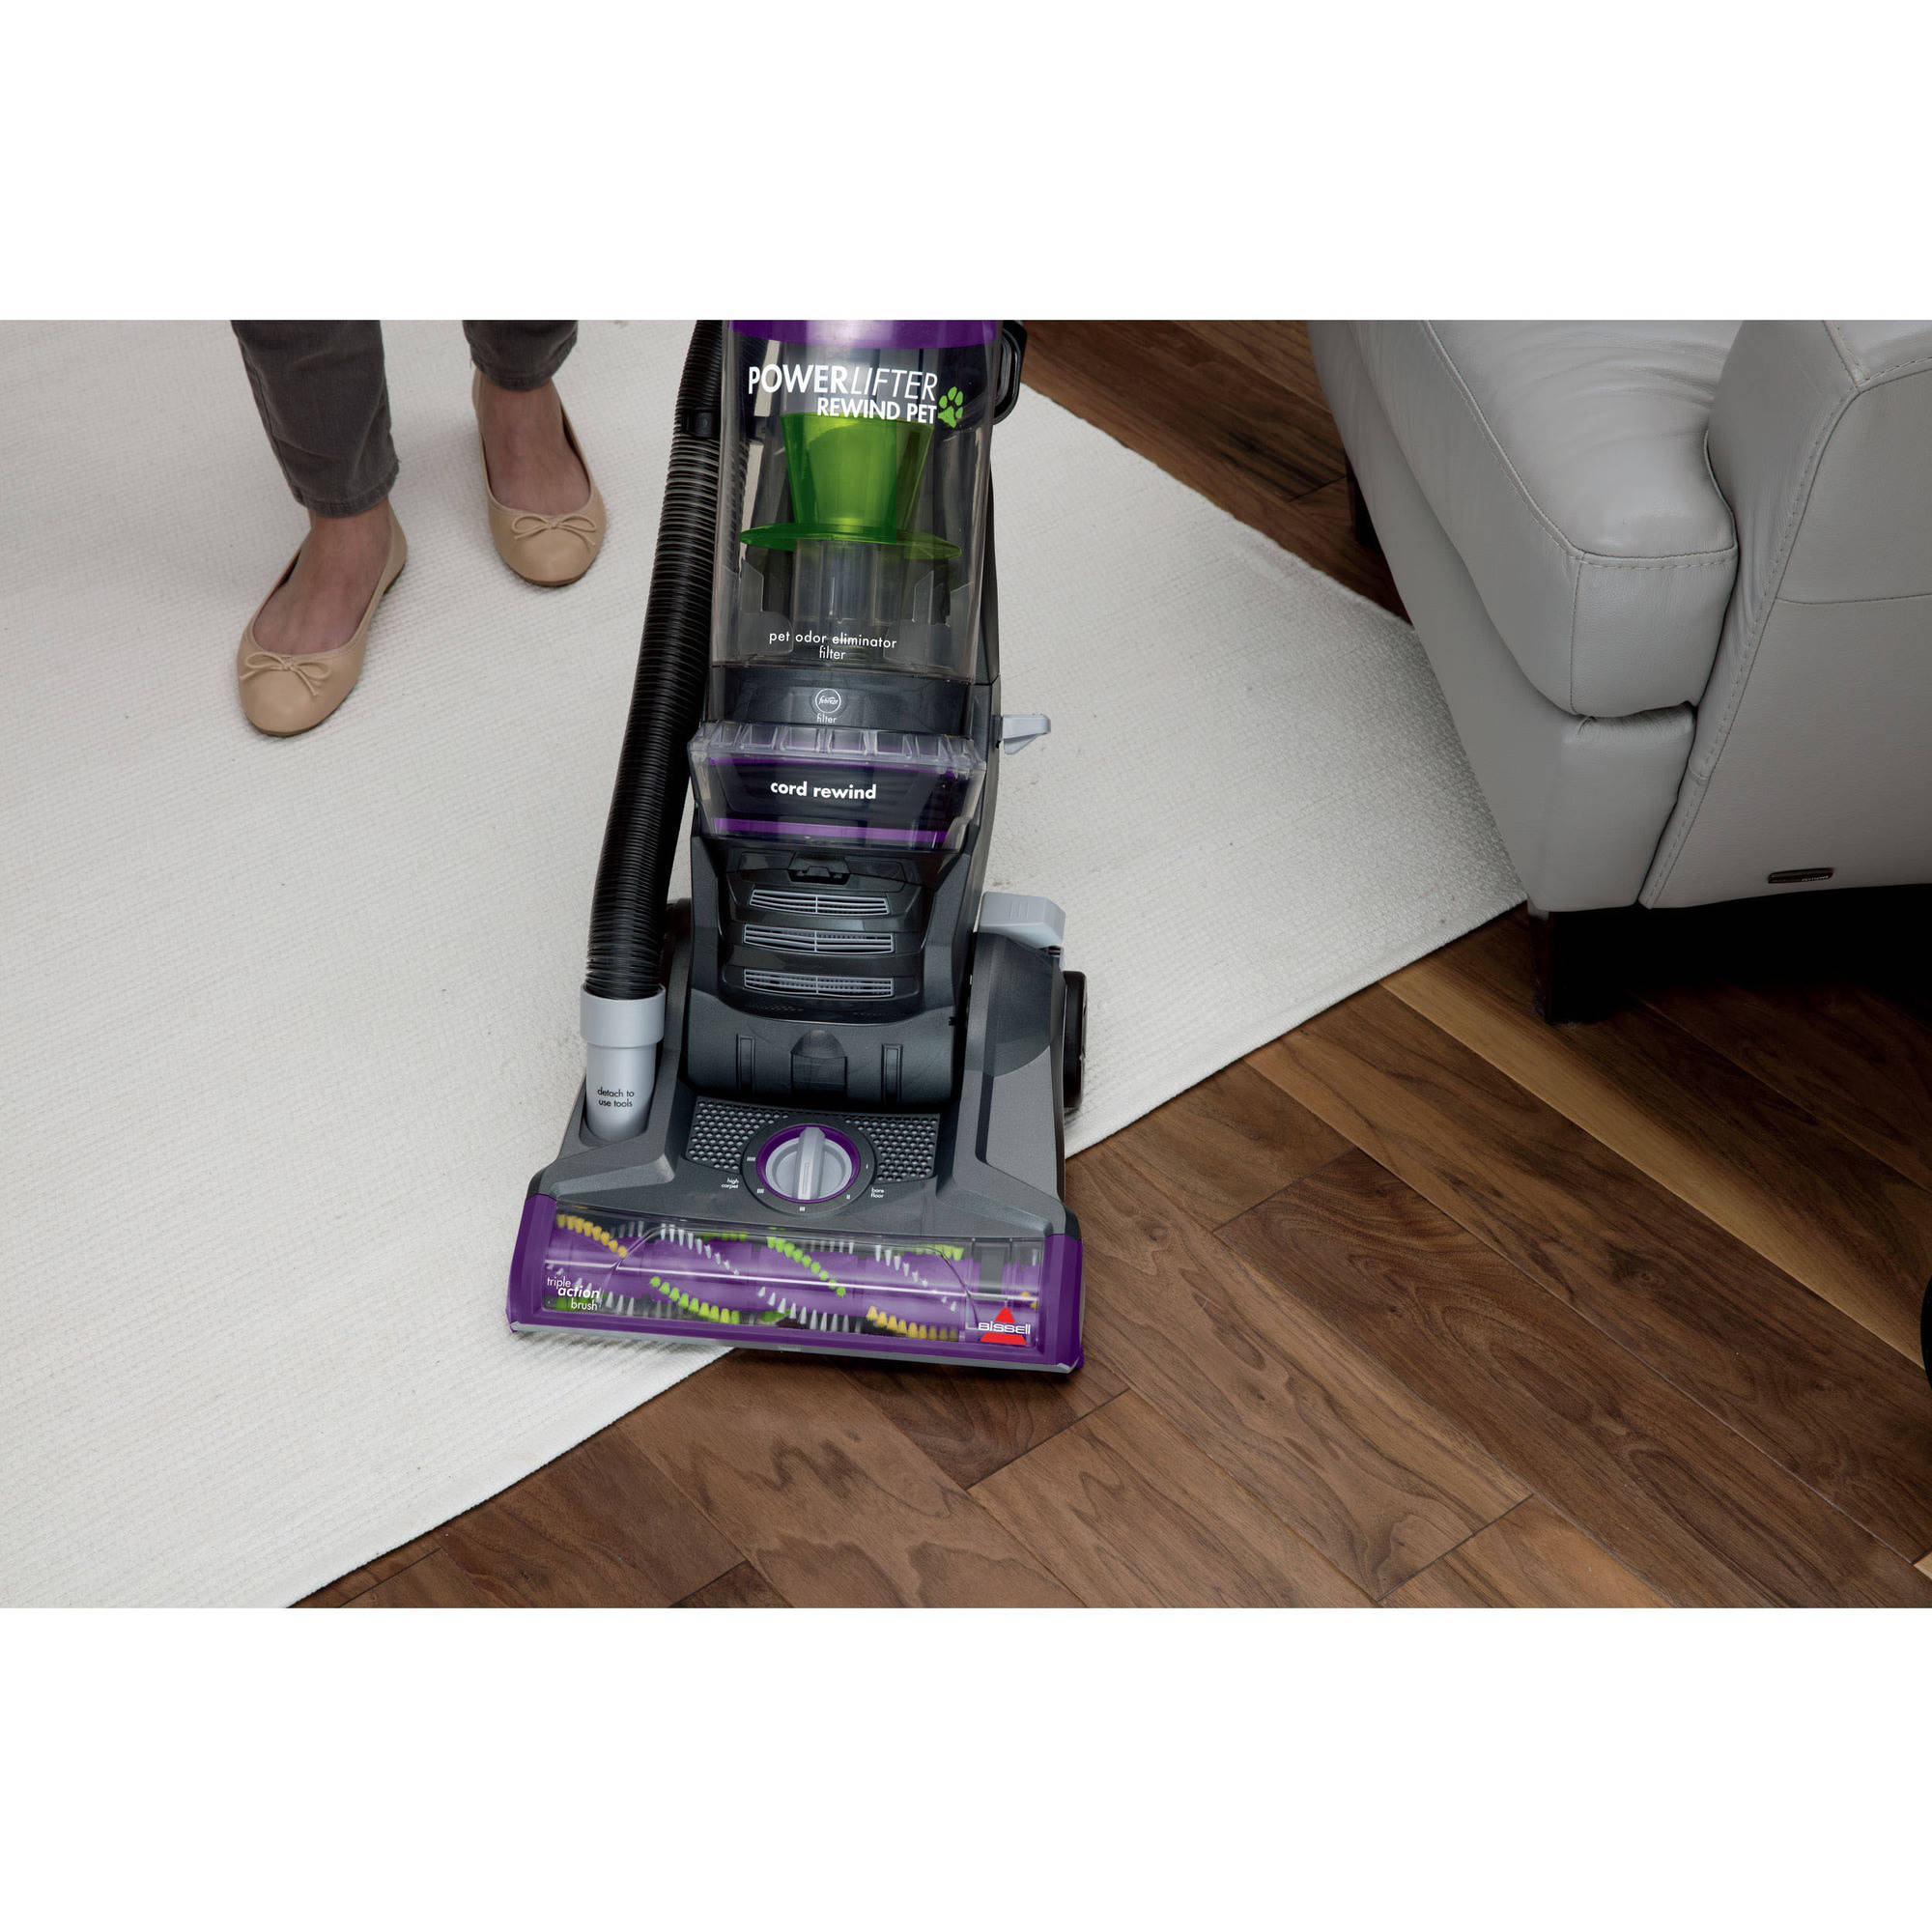 Bissell PowerLifter Pet Rewind Bagless Upright Vacuum Cleaner, 1792 - image 5 of 9